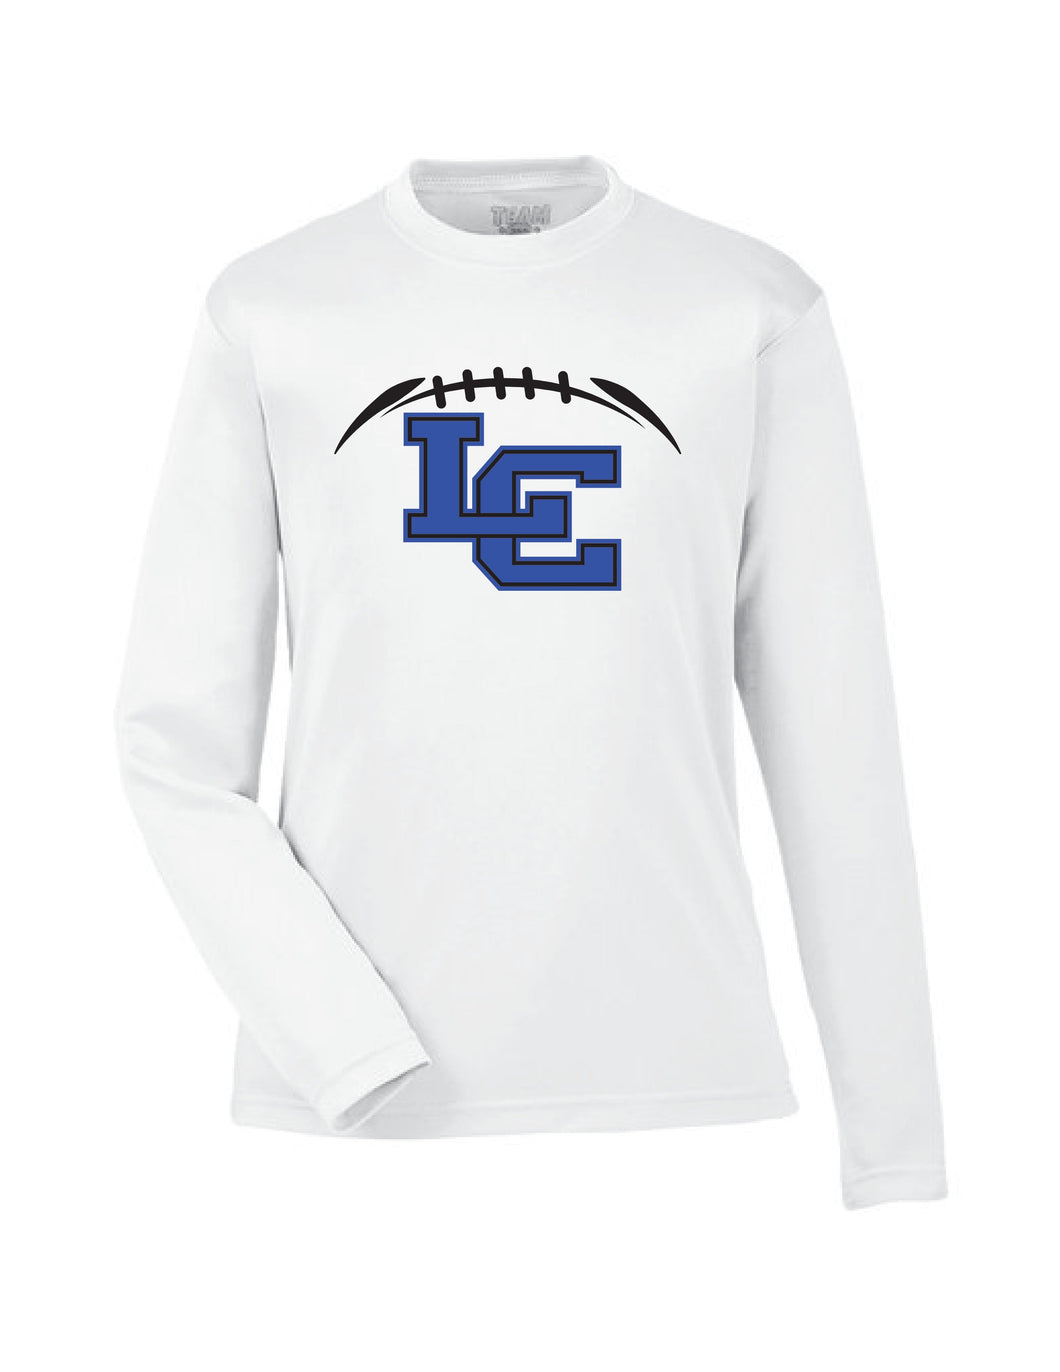 Sale- Dry Fit LC Football